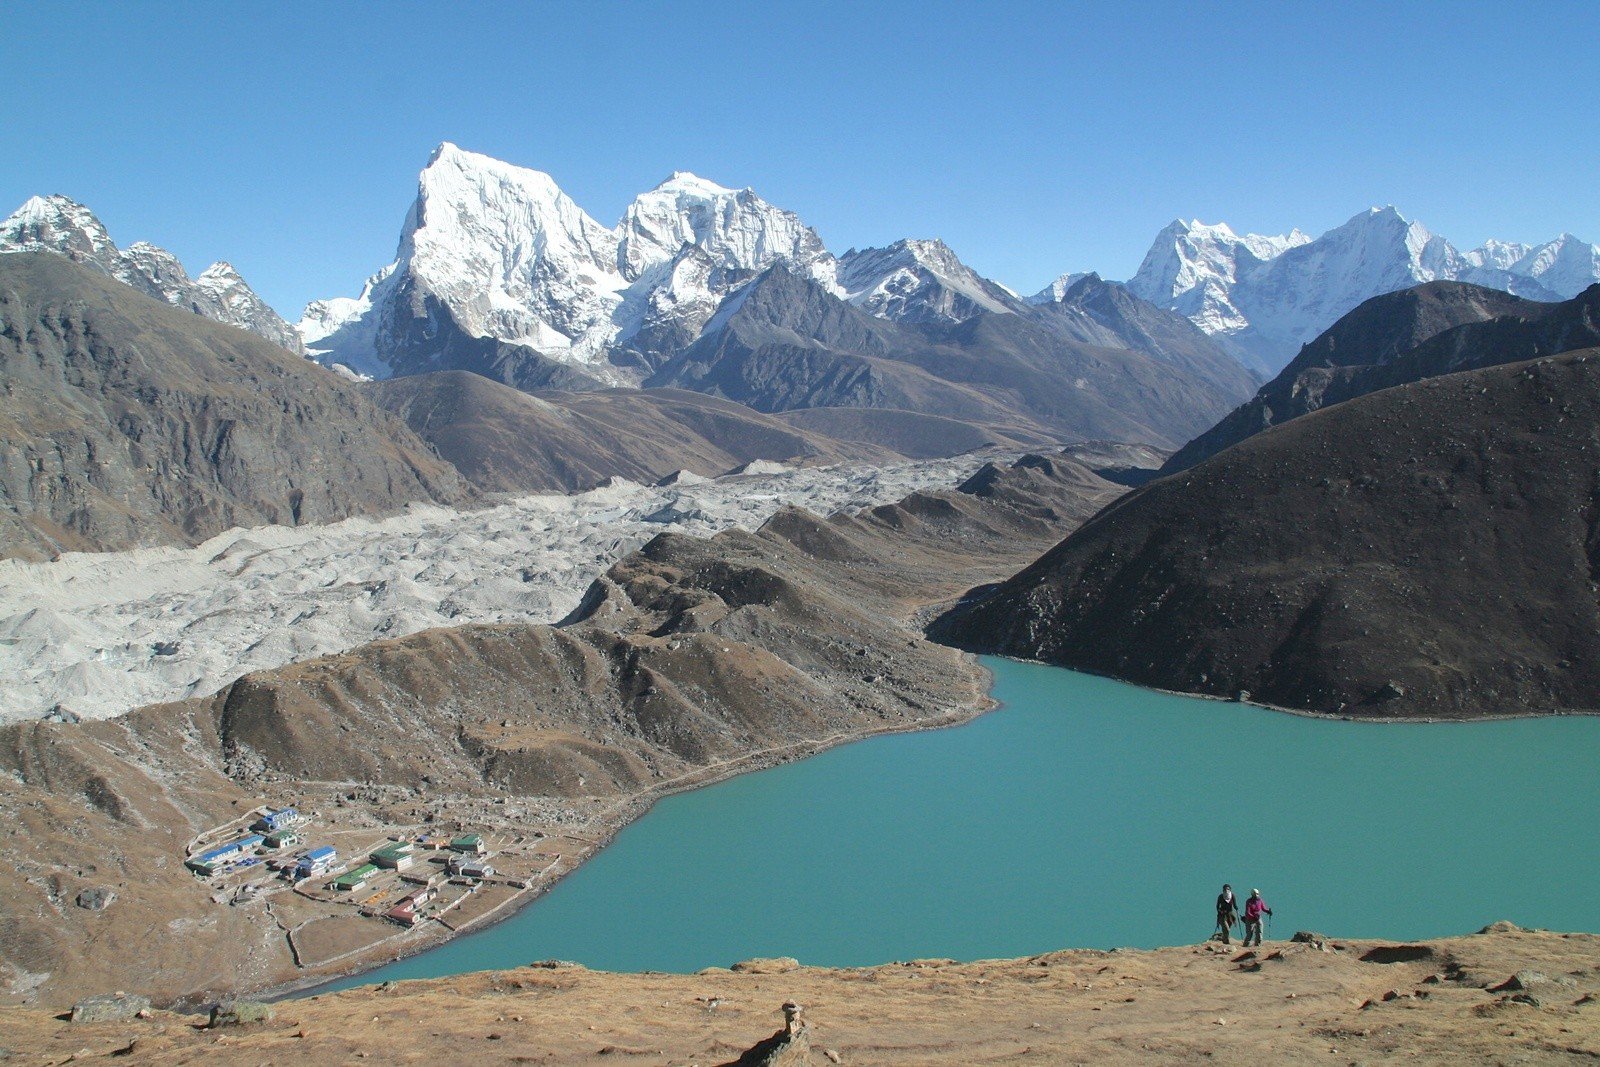 A view of Gokyo Lakes, near Everest Base Camp.